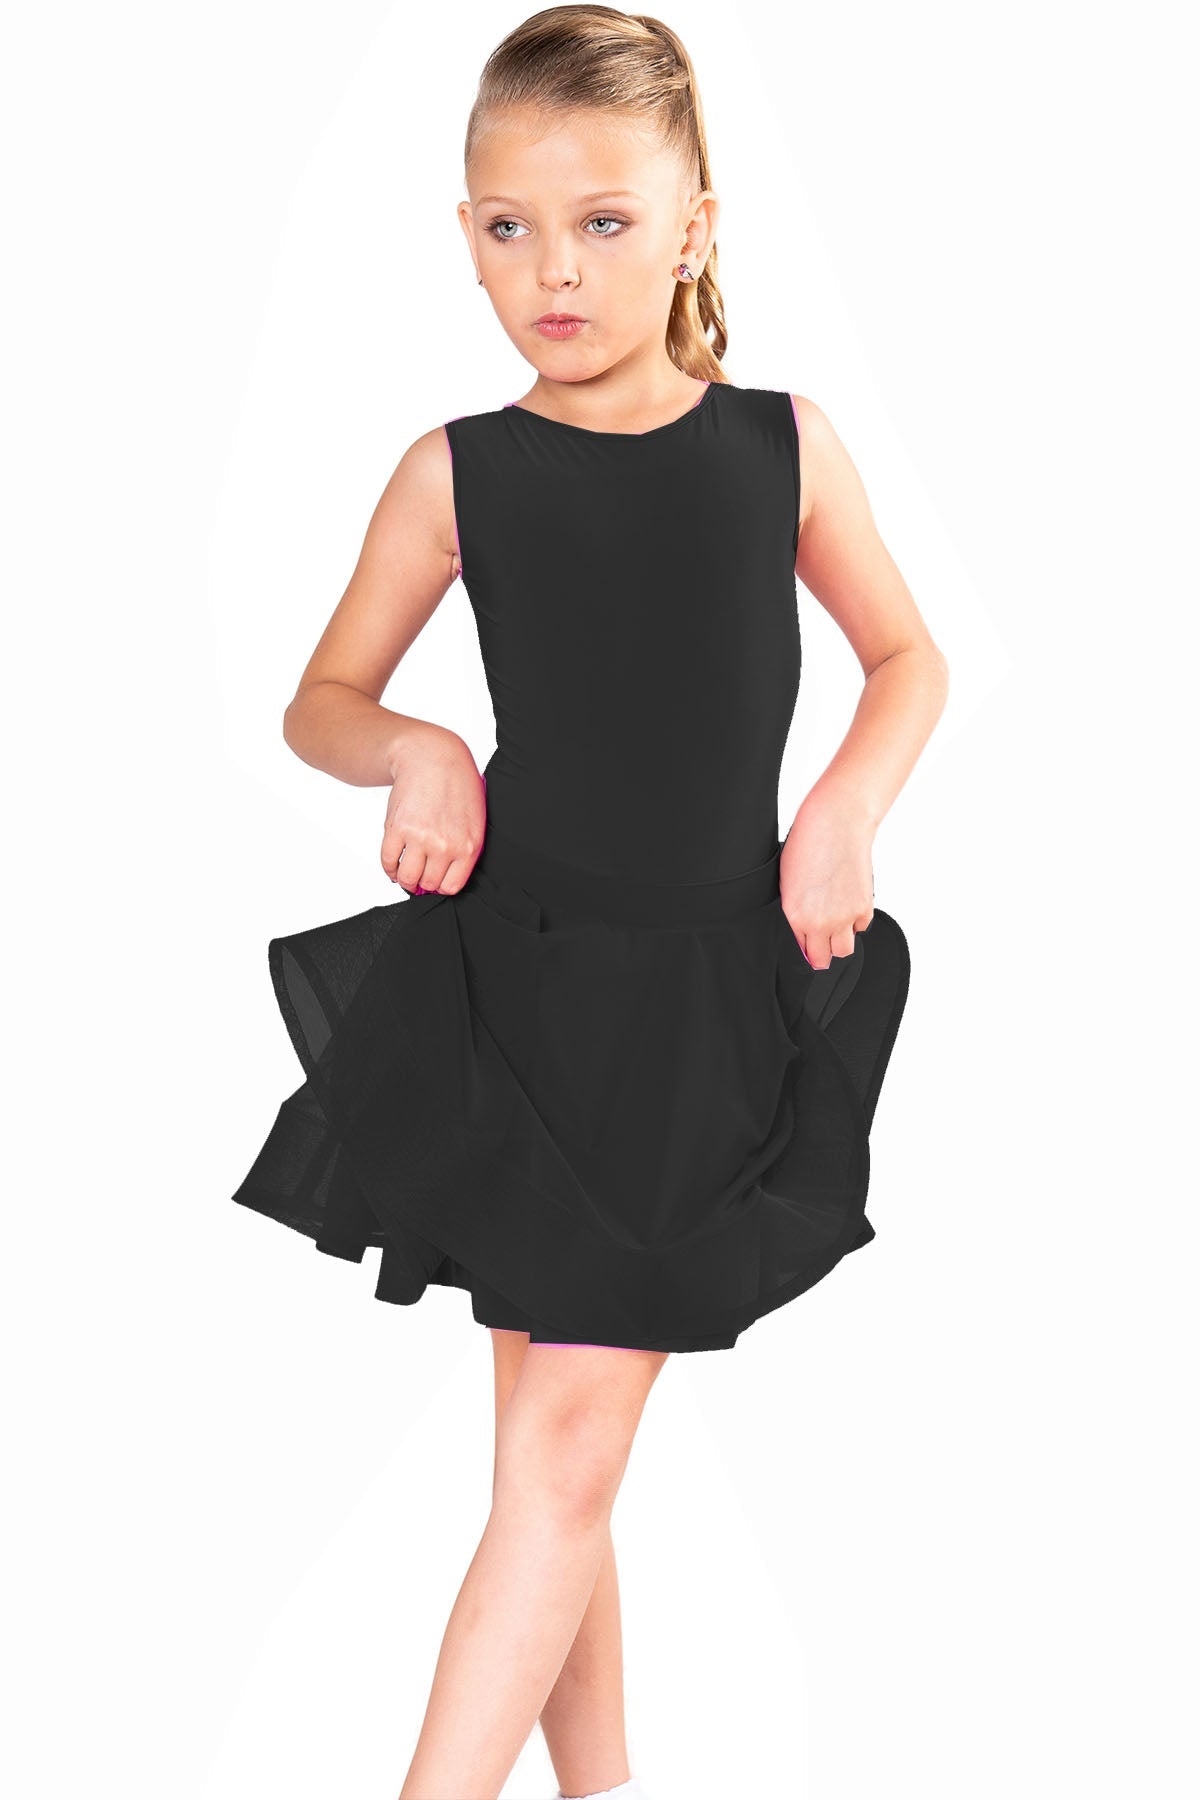 Black Latin dance mesh skirt and bodysuit for young dancers